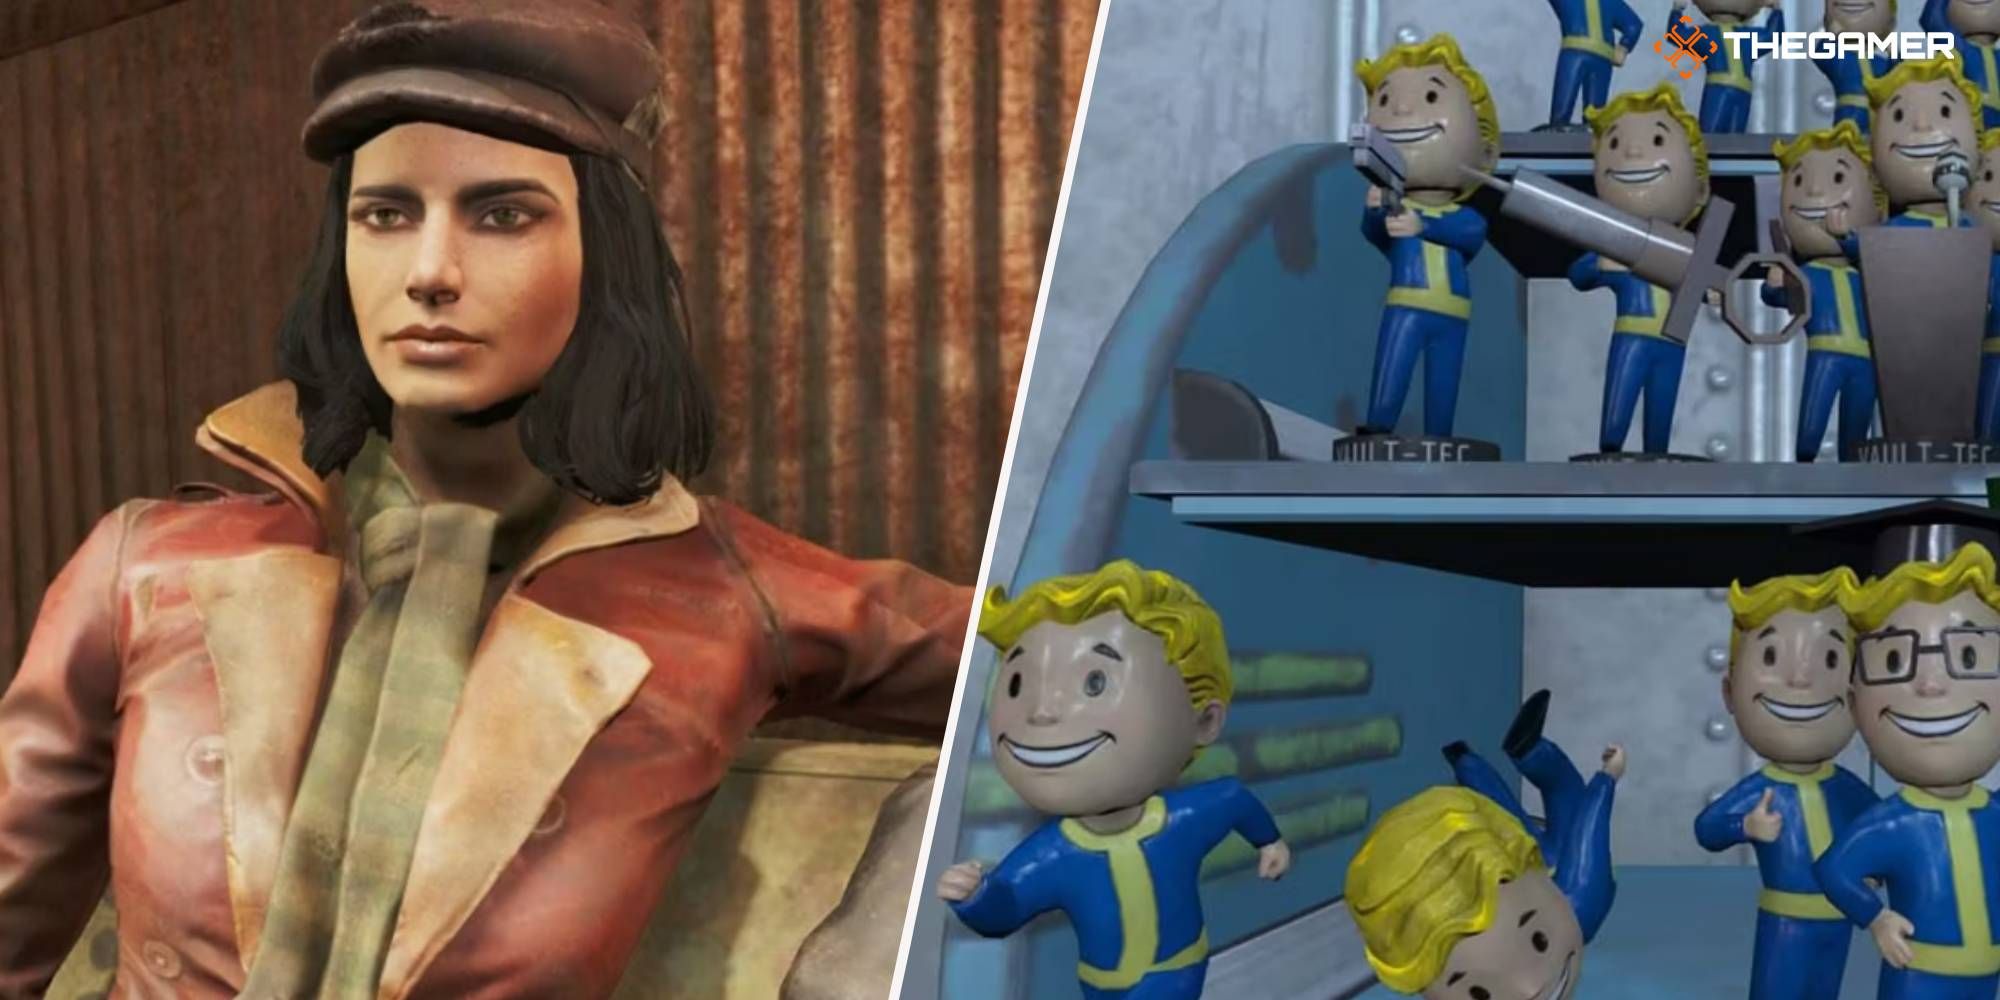 Fallout 4 Piper and a Collection of Bobbleheads